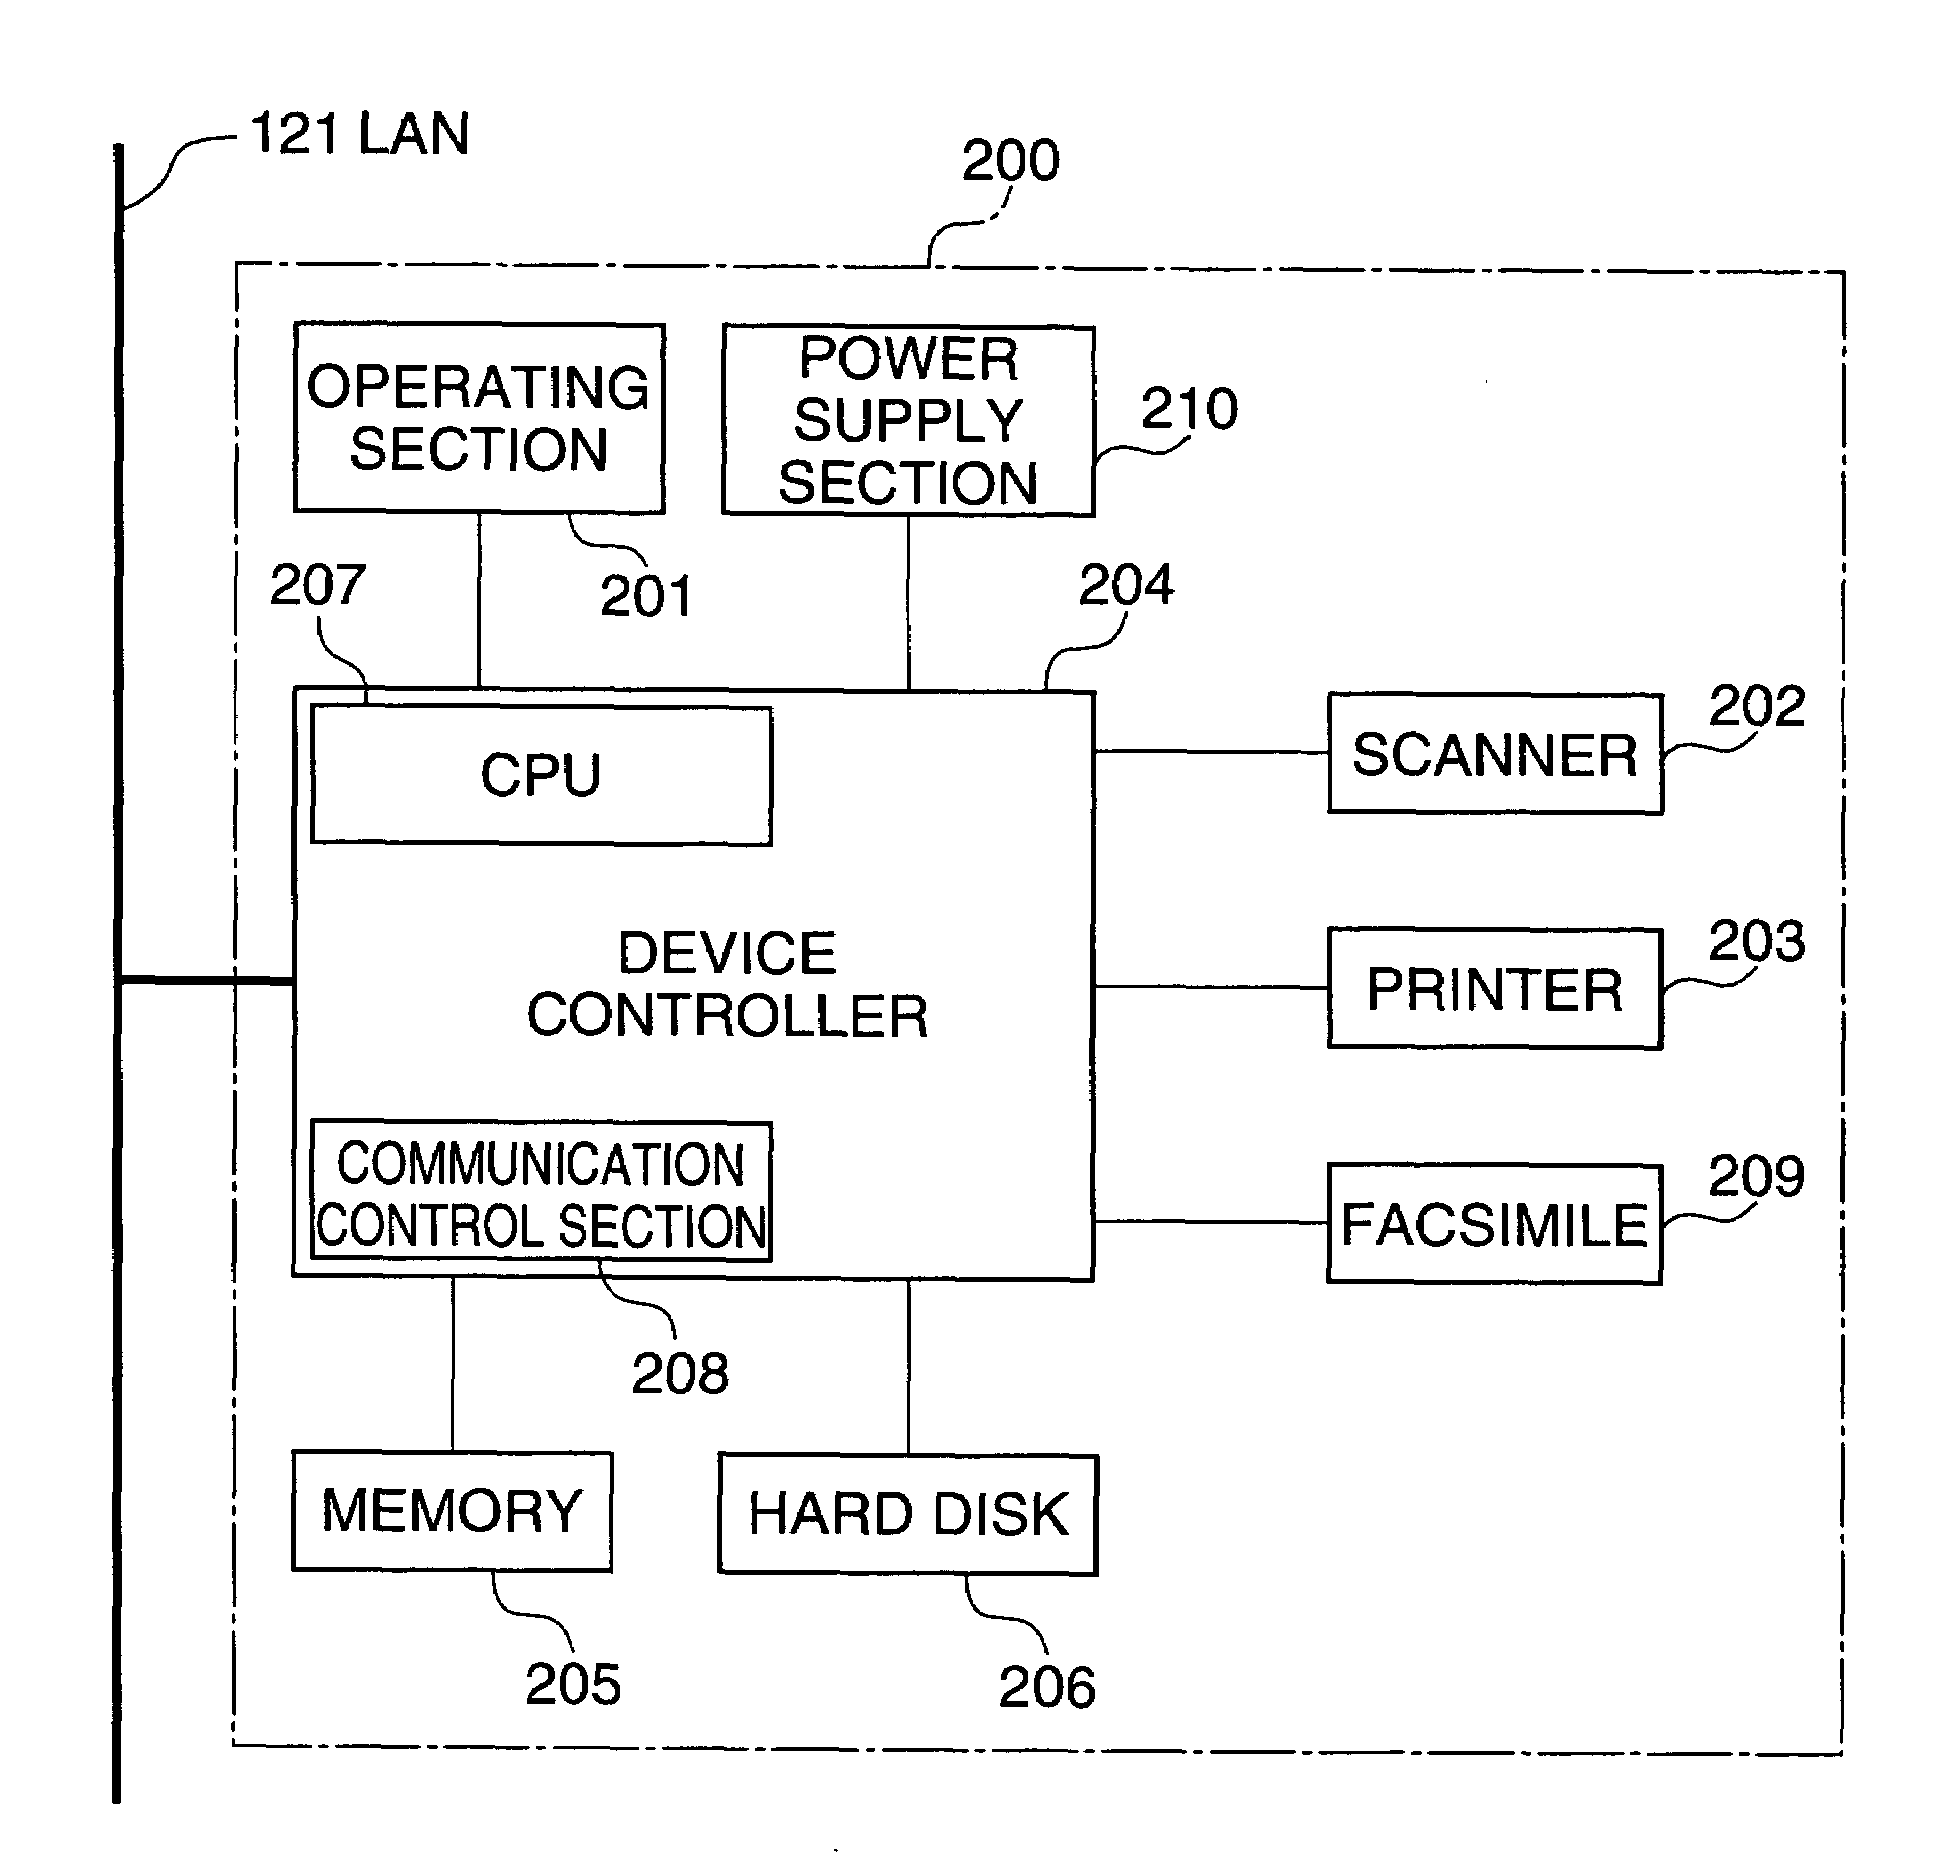 Remote power configuration of functions within multifunction apparatus using status and setting screens displayed on external apparatus